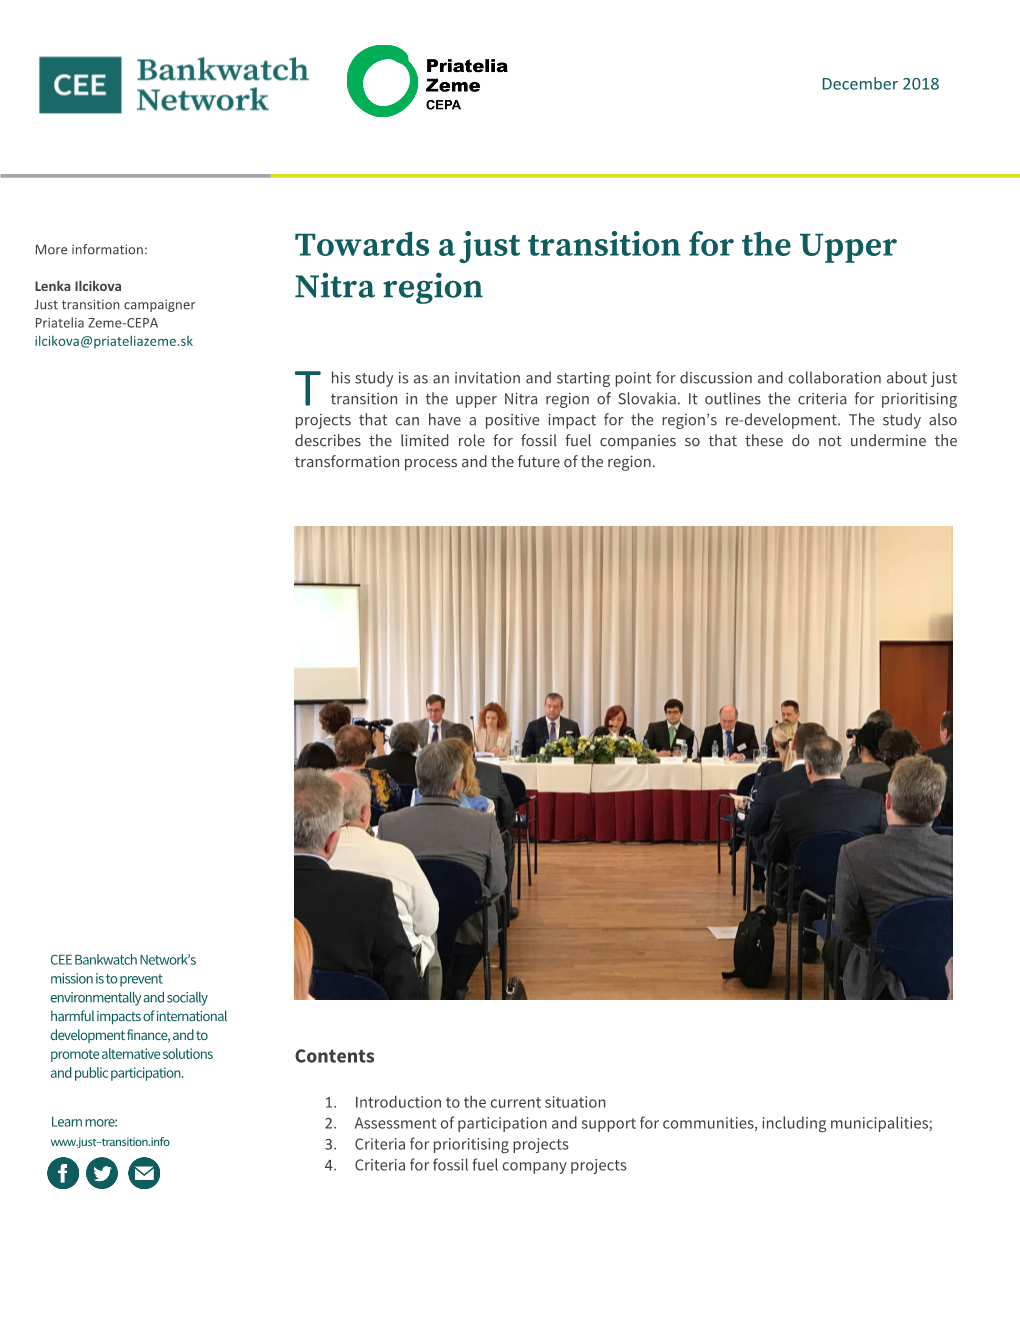 Towards a Just Transition for the Upper Nitra Region